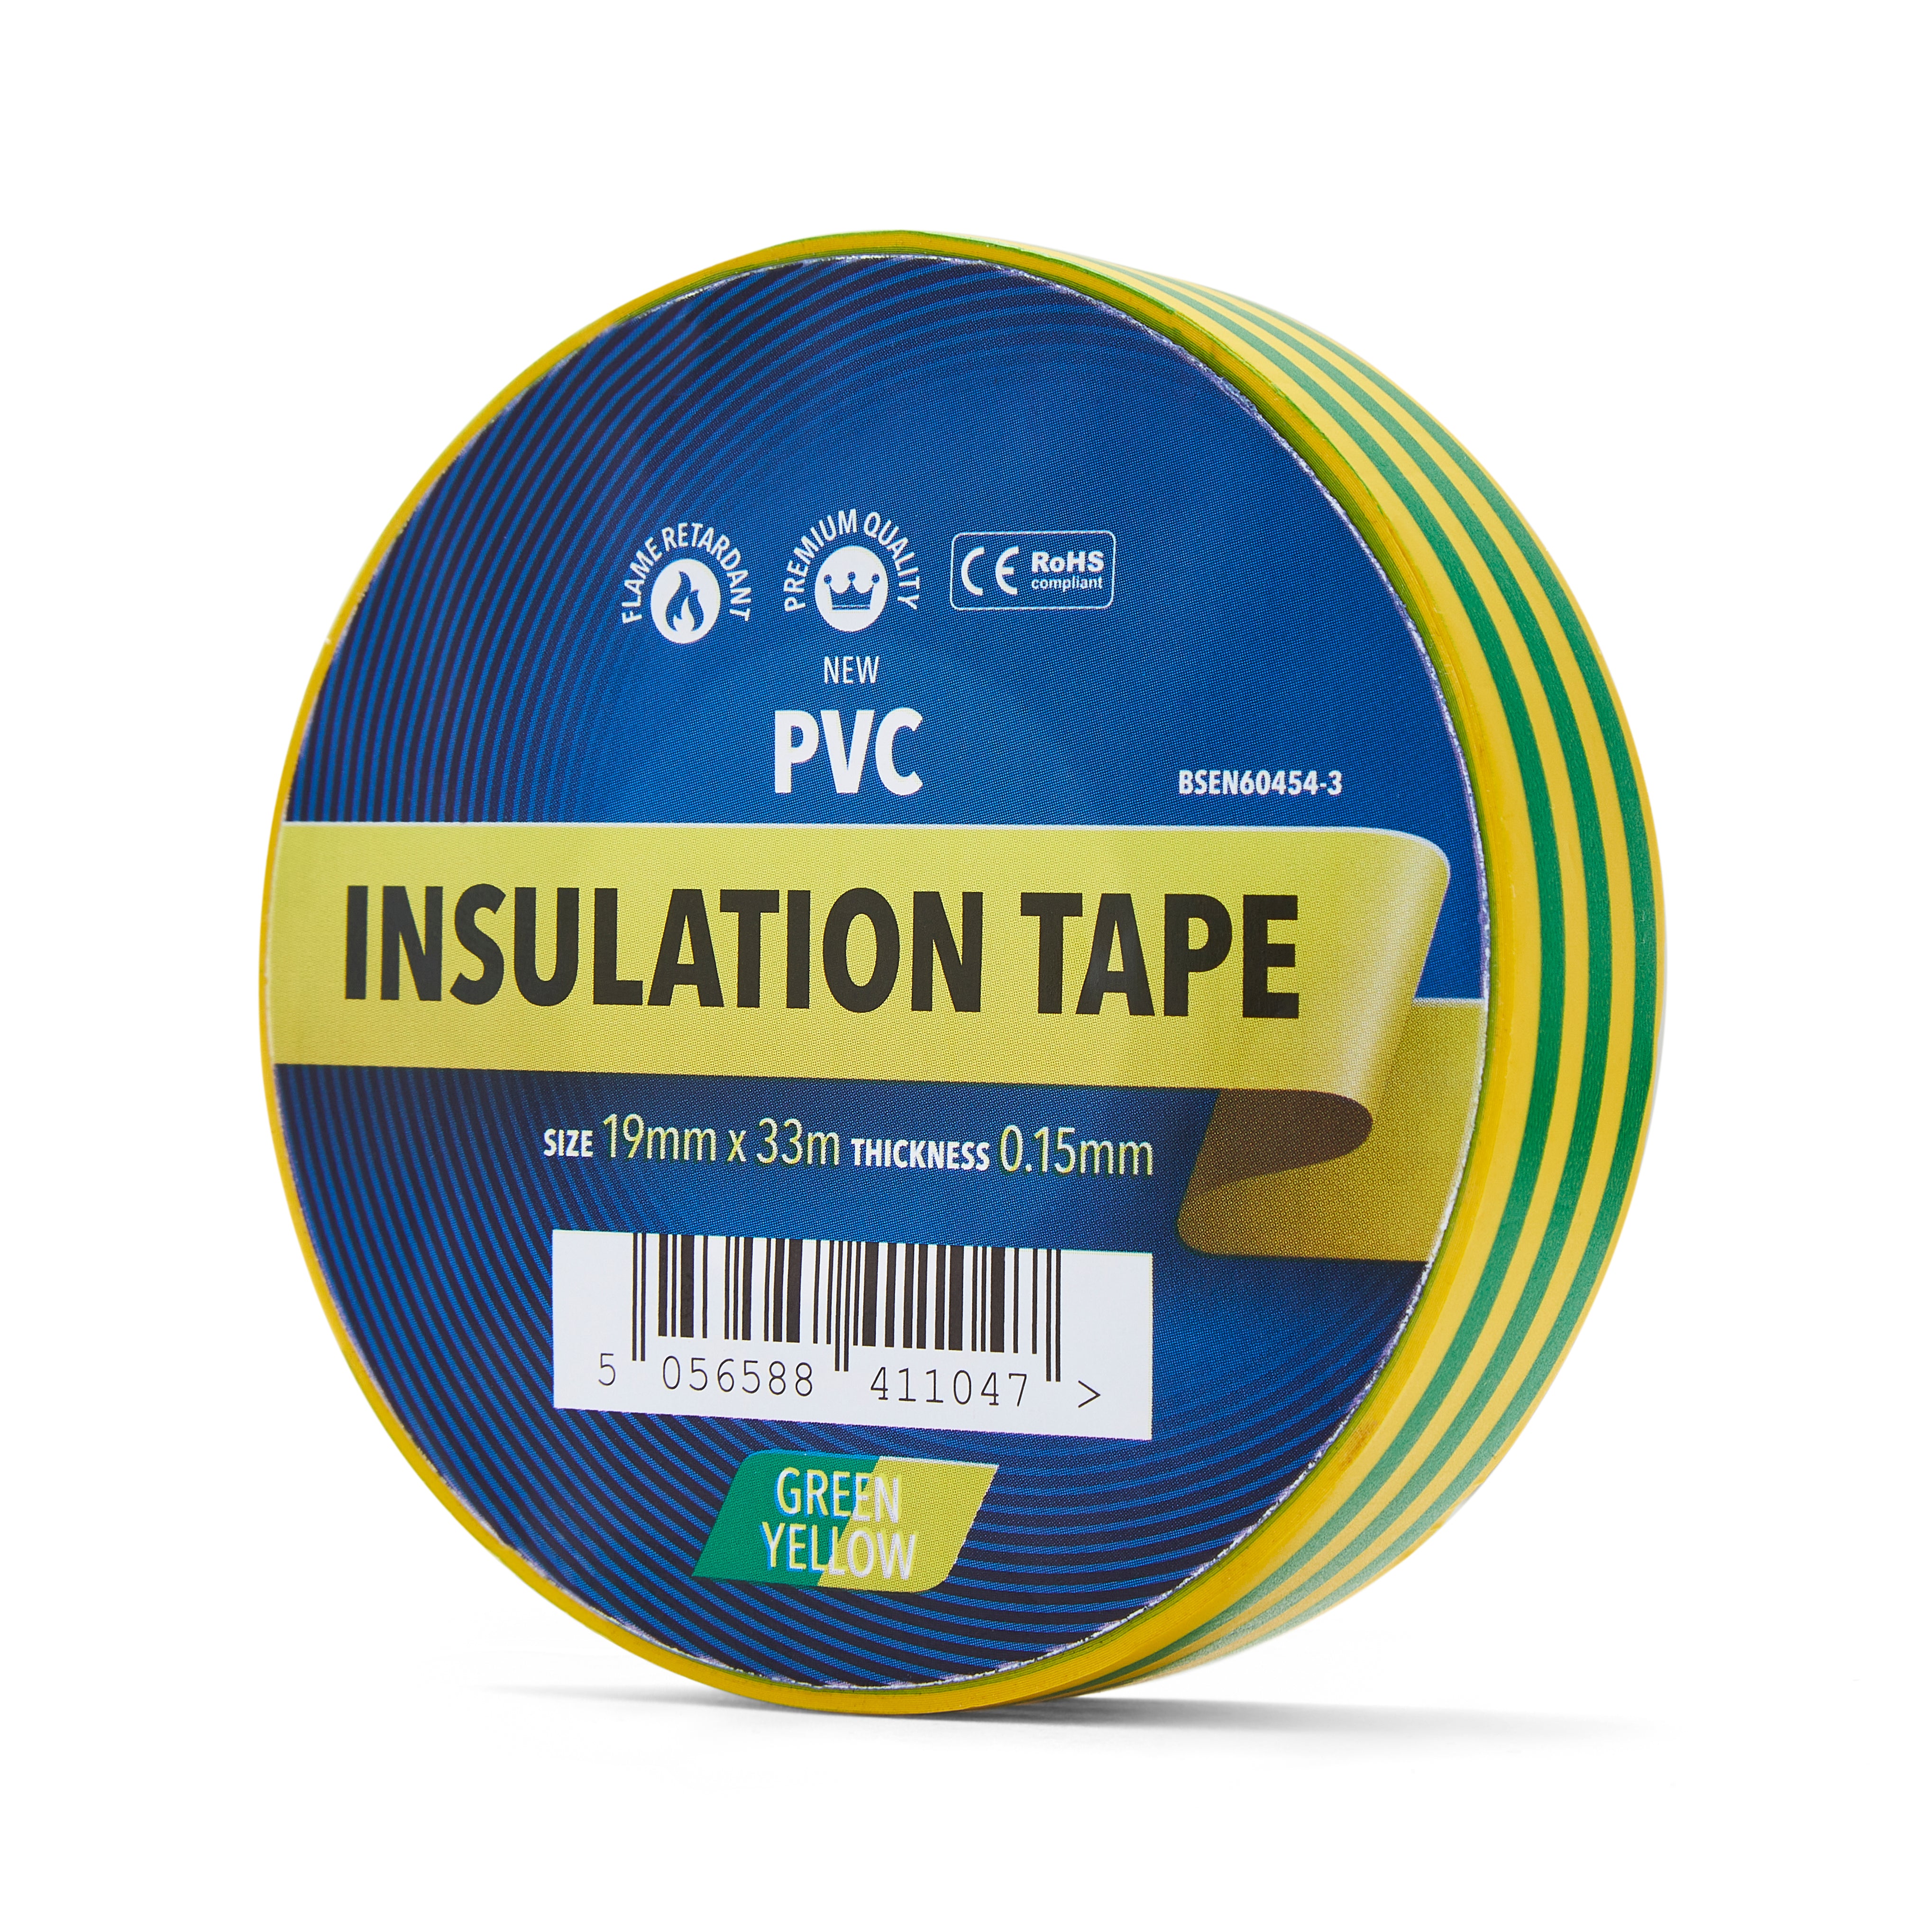 Earth Electrical Tape (Green & Yellow) 19mm - PVC Insulation Tape